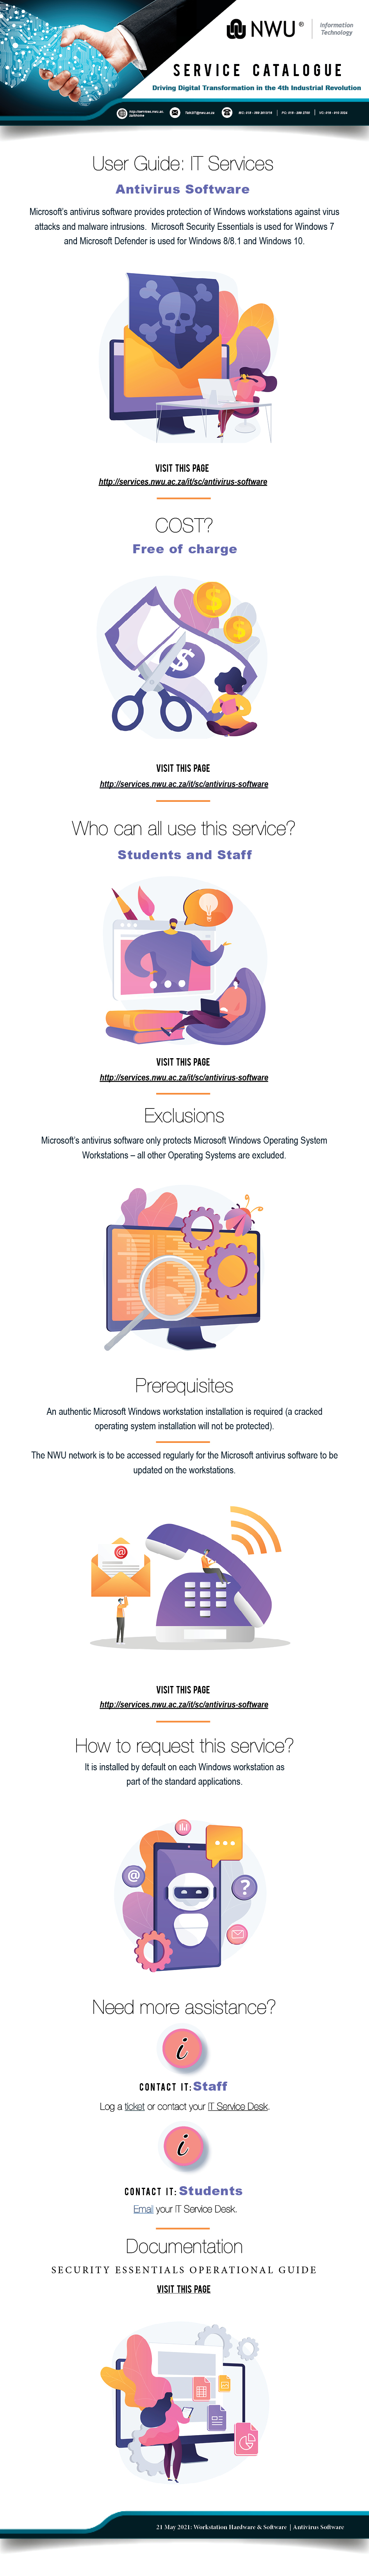 Infographic stating information about which antivirus to use. Microsoft Defender for Win 8 etc.